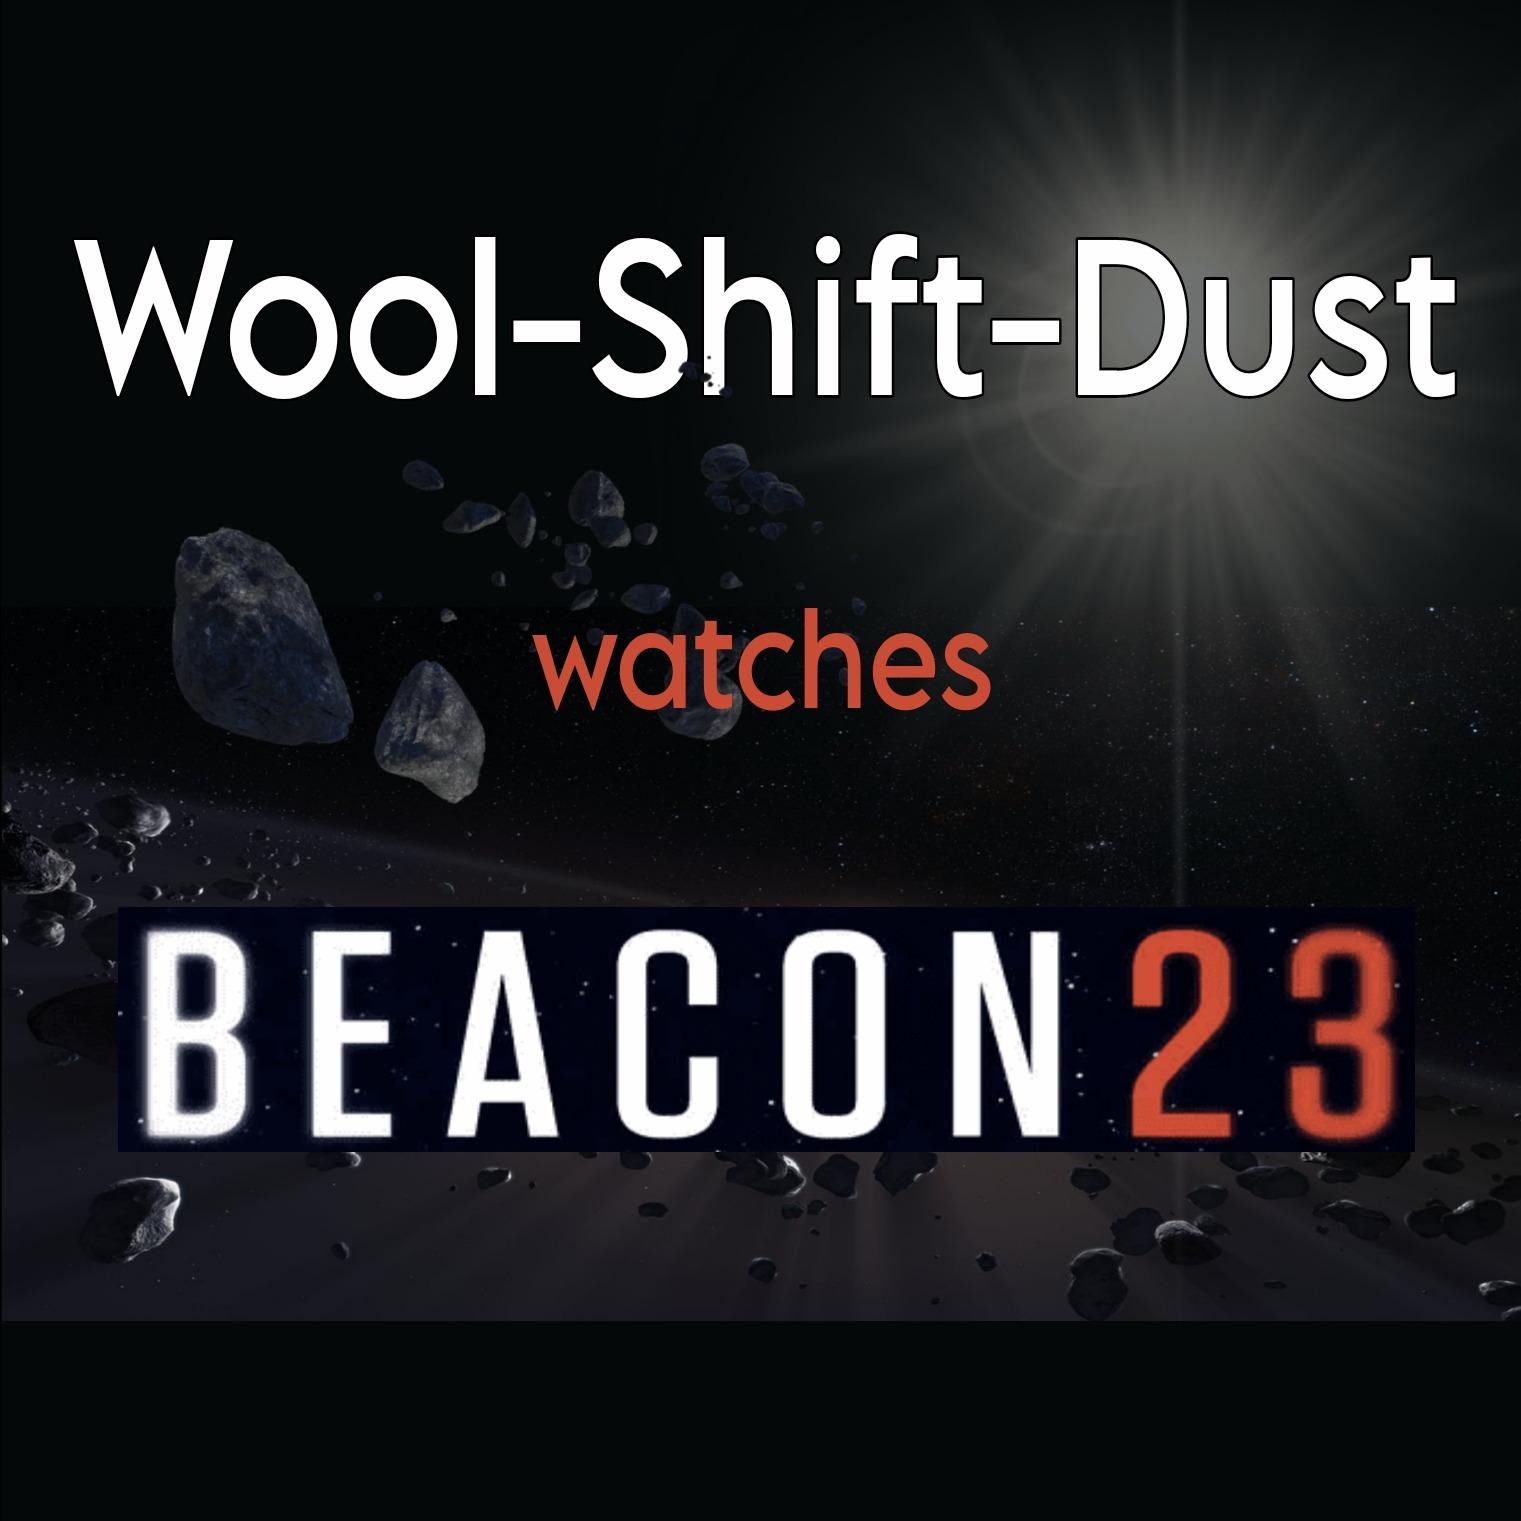 Wool-Shift-Dust watches Beacon 23